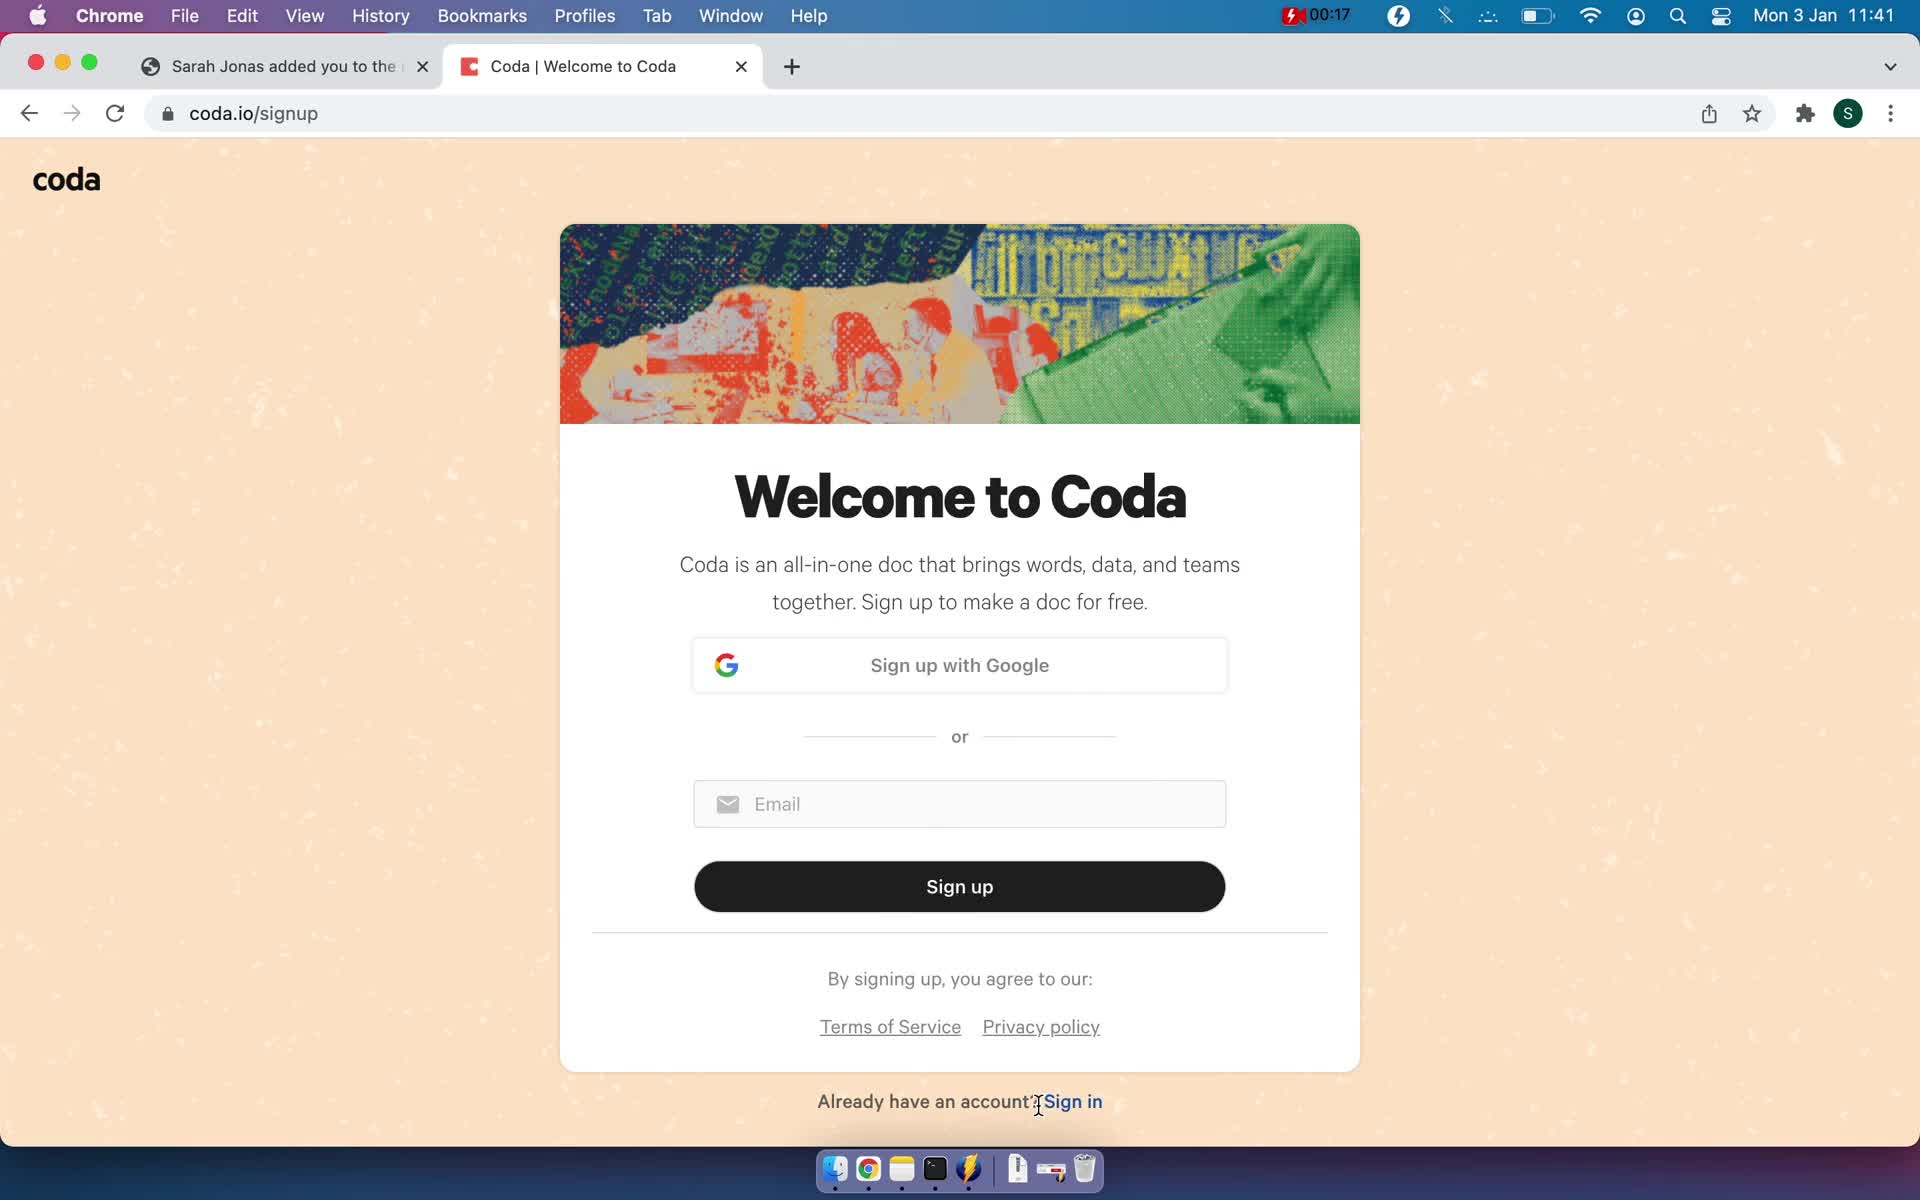 Screenshot of Sign up on Accepting an invite on Coda user flow